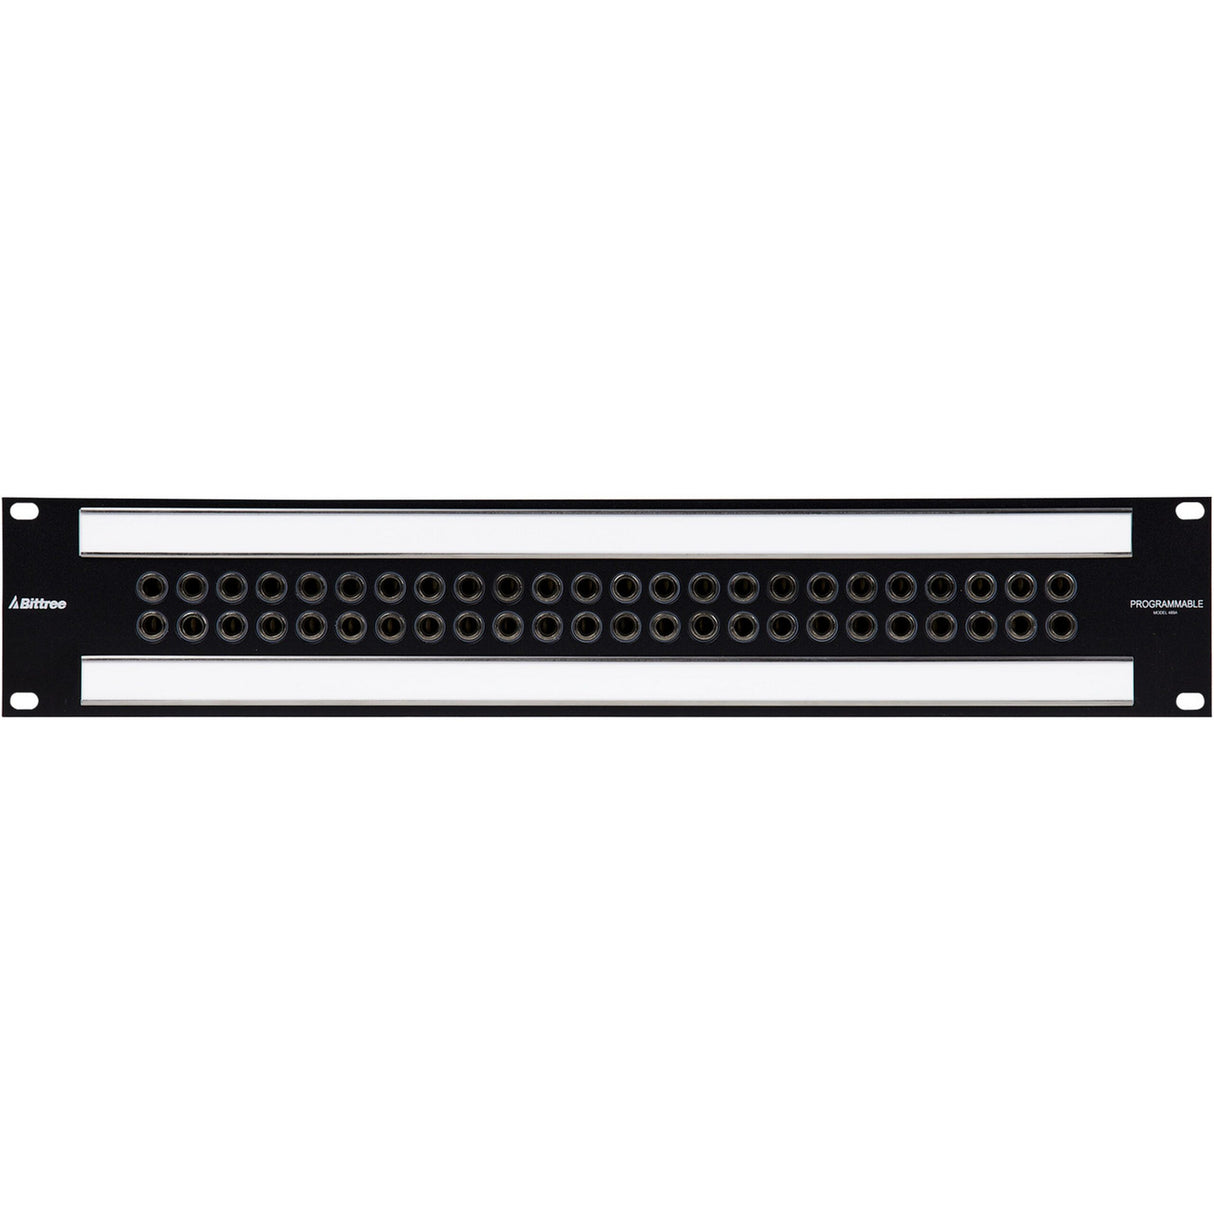 Bittree B48DC-FNSST/E3 M2OU12L E3 Full Norm Switched Ground Long-Frame Patchbay, 2RU 2 x 24